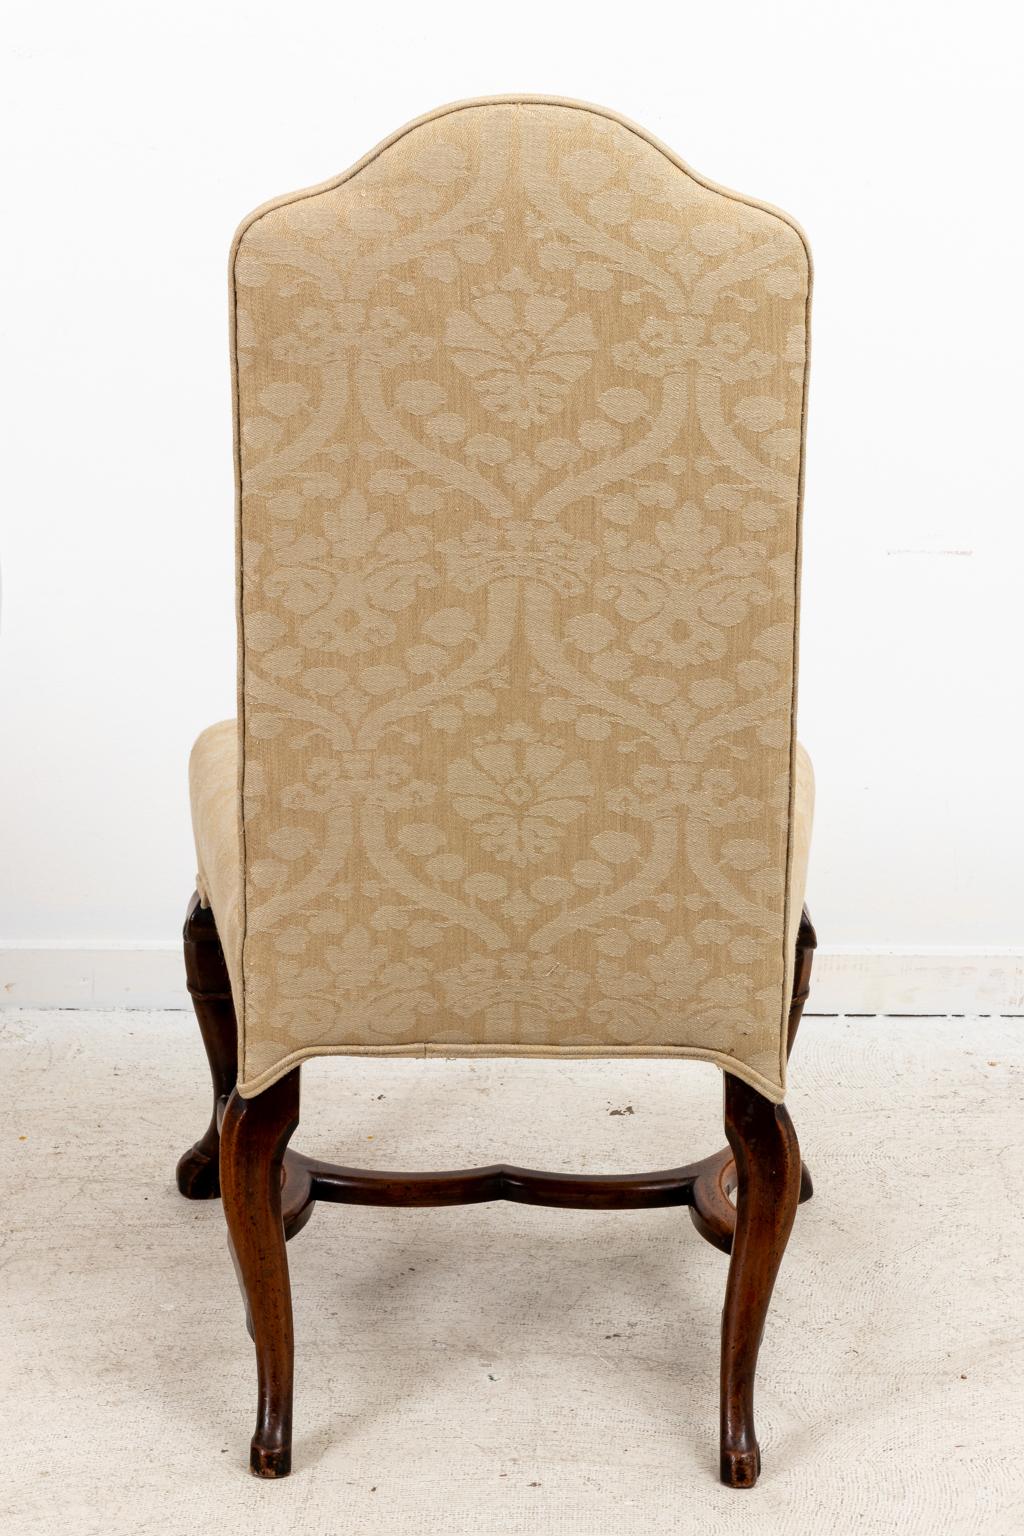 Upholstery Set of Four English Style Side Chairs